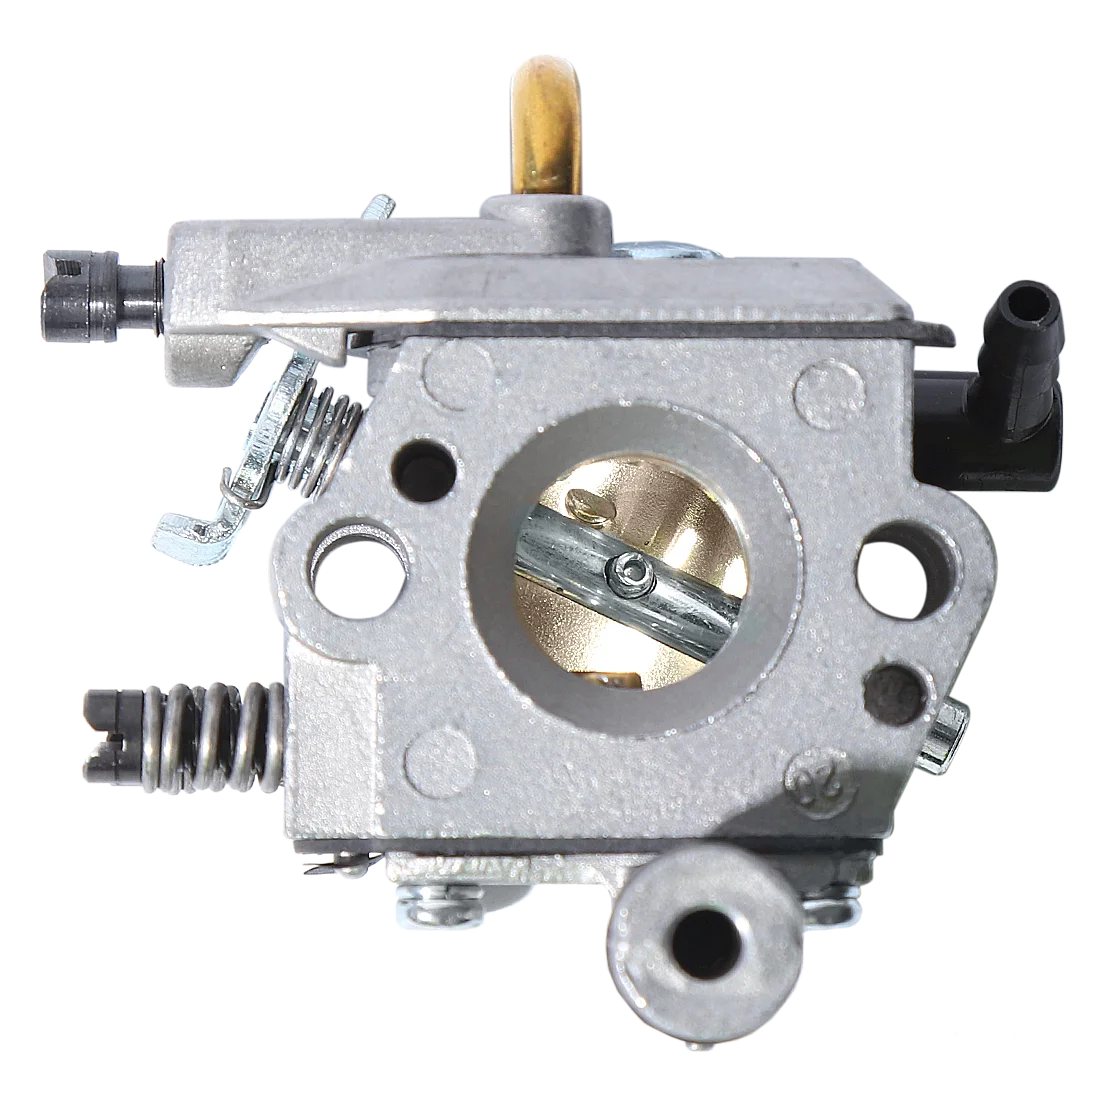 

Carburetor For Stihl MS240 MS260 024 026 Chainsaw WT-403B Replacement 1121 120 0610 Carb Chainsaw Engine Motor Parts